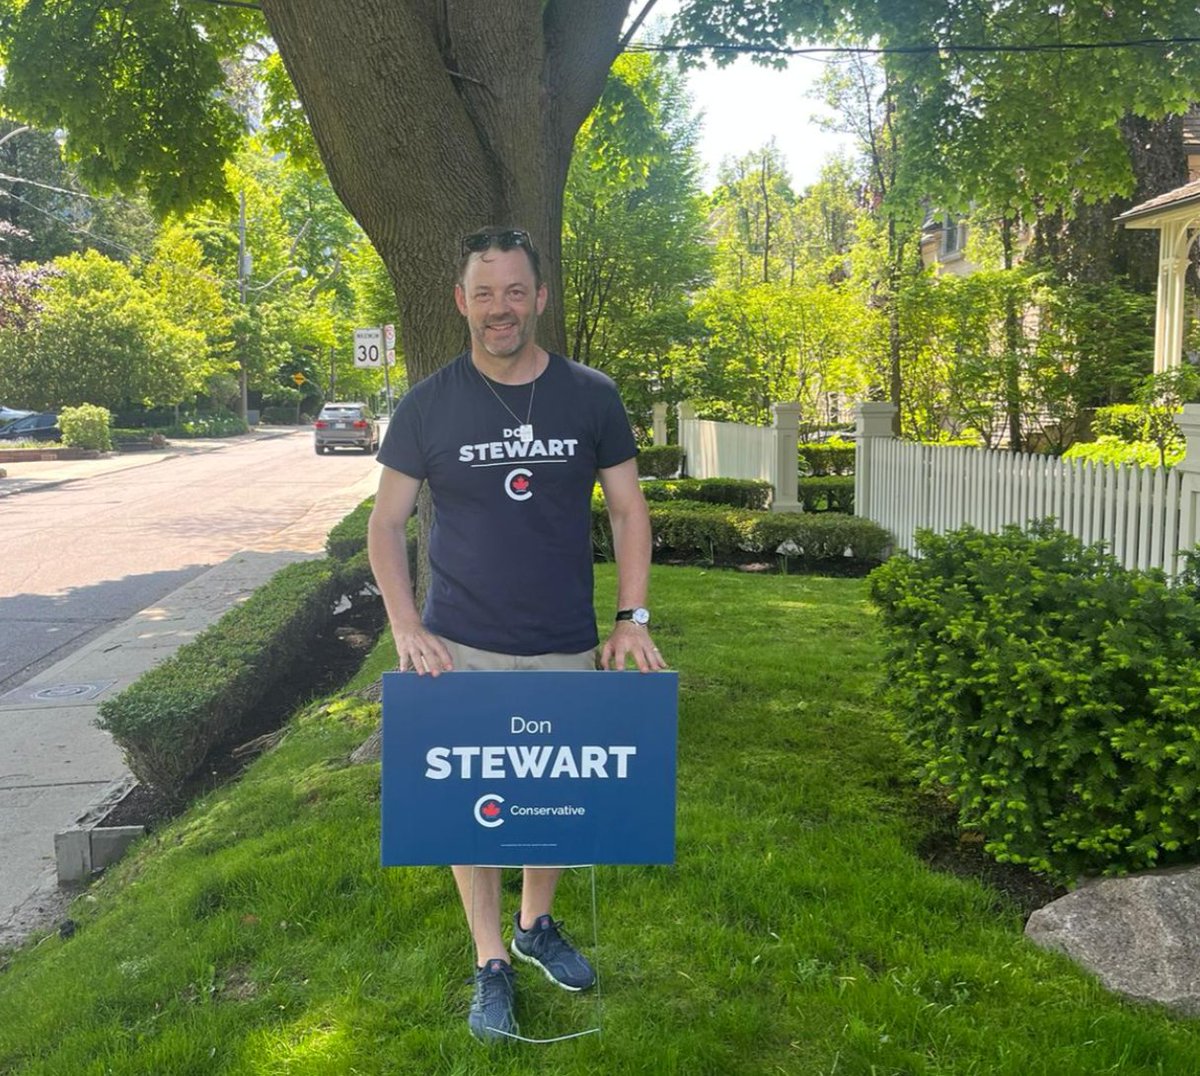 The race is on. Toronto—St. Paul's has the chance to tell the country how we are doing. Are we on the right track or is it time for change? It is up to you. Thank you volunteers and @MelissaLantsman for your help this morning! #votedonstewart